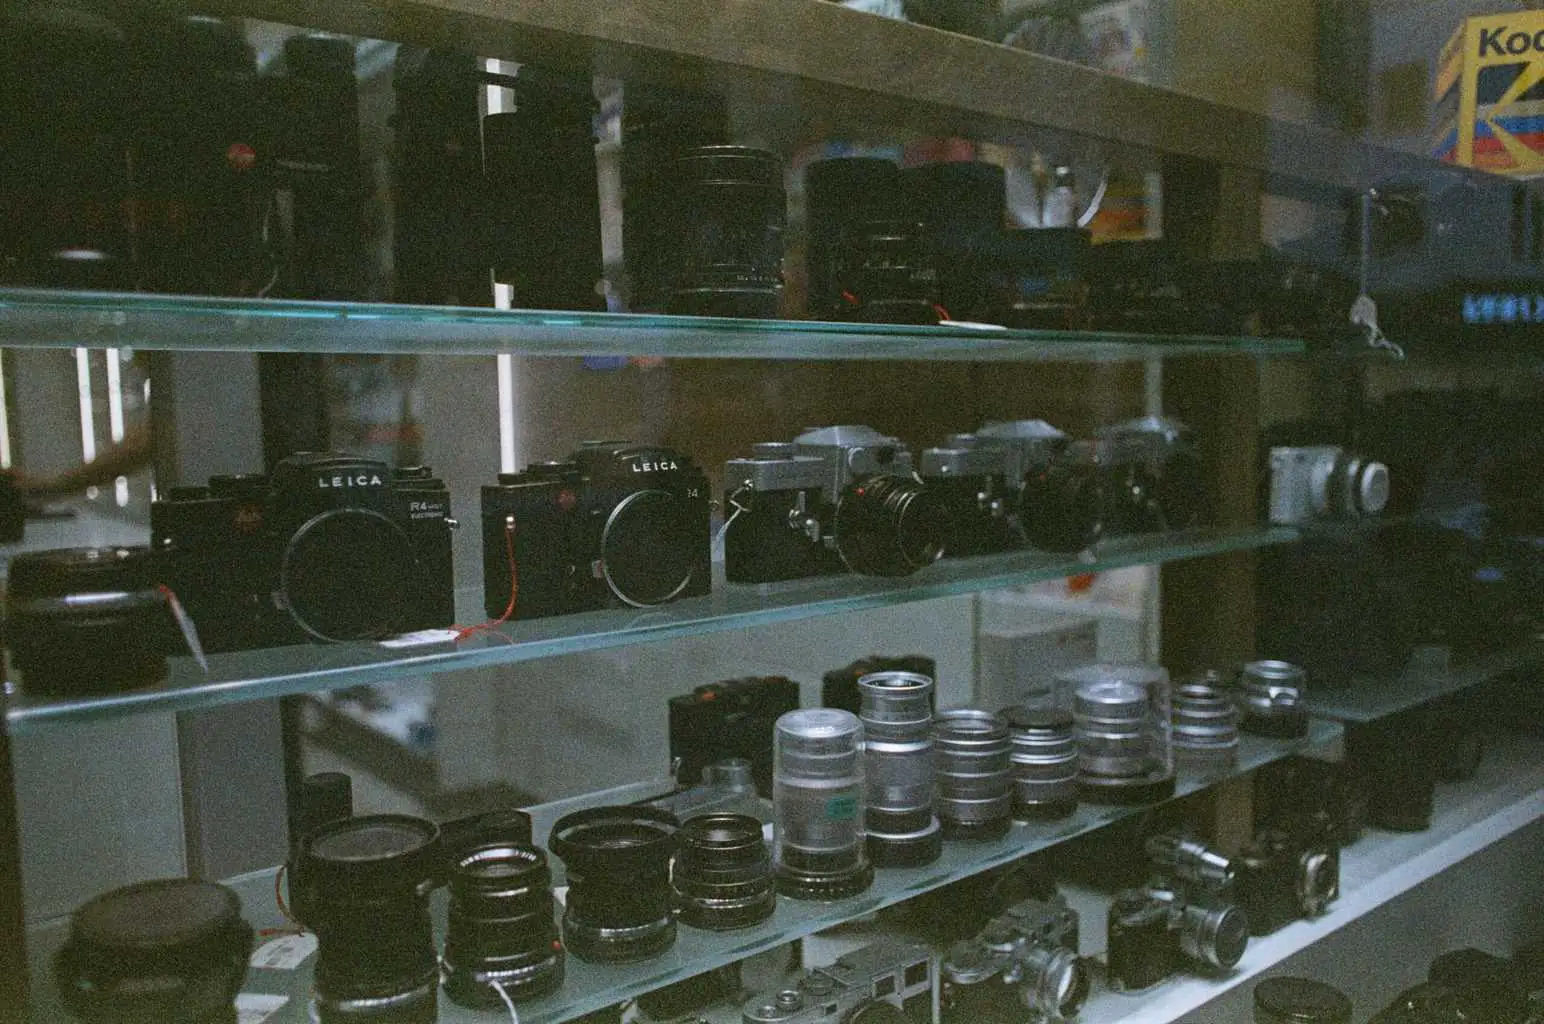 A photo showing a collection of vintage cameras